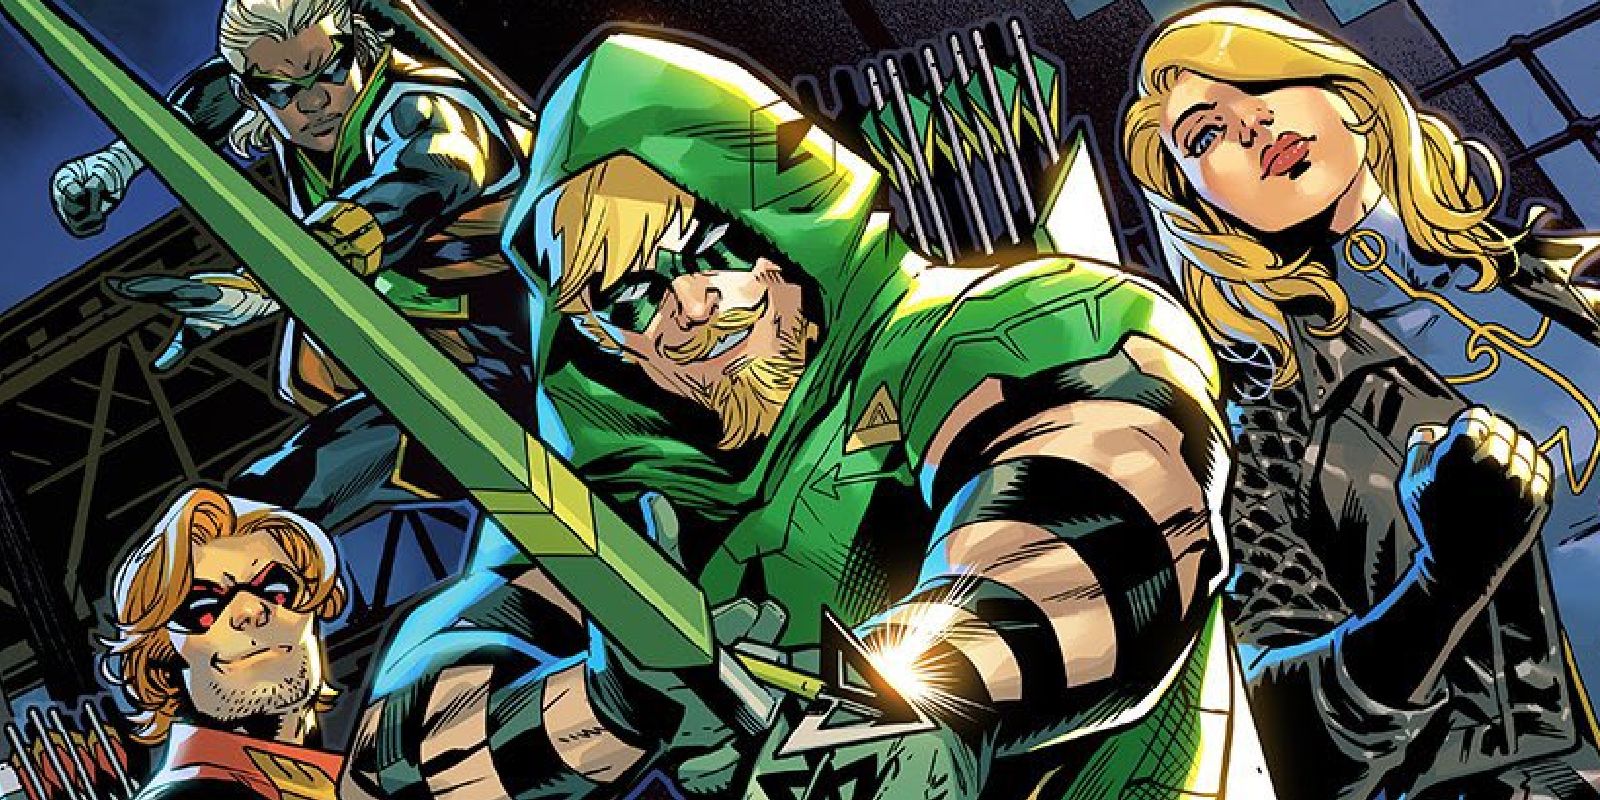 Green Arrow and friends in DC Comics.